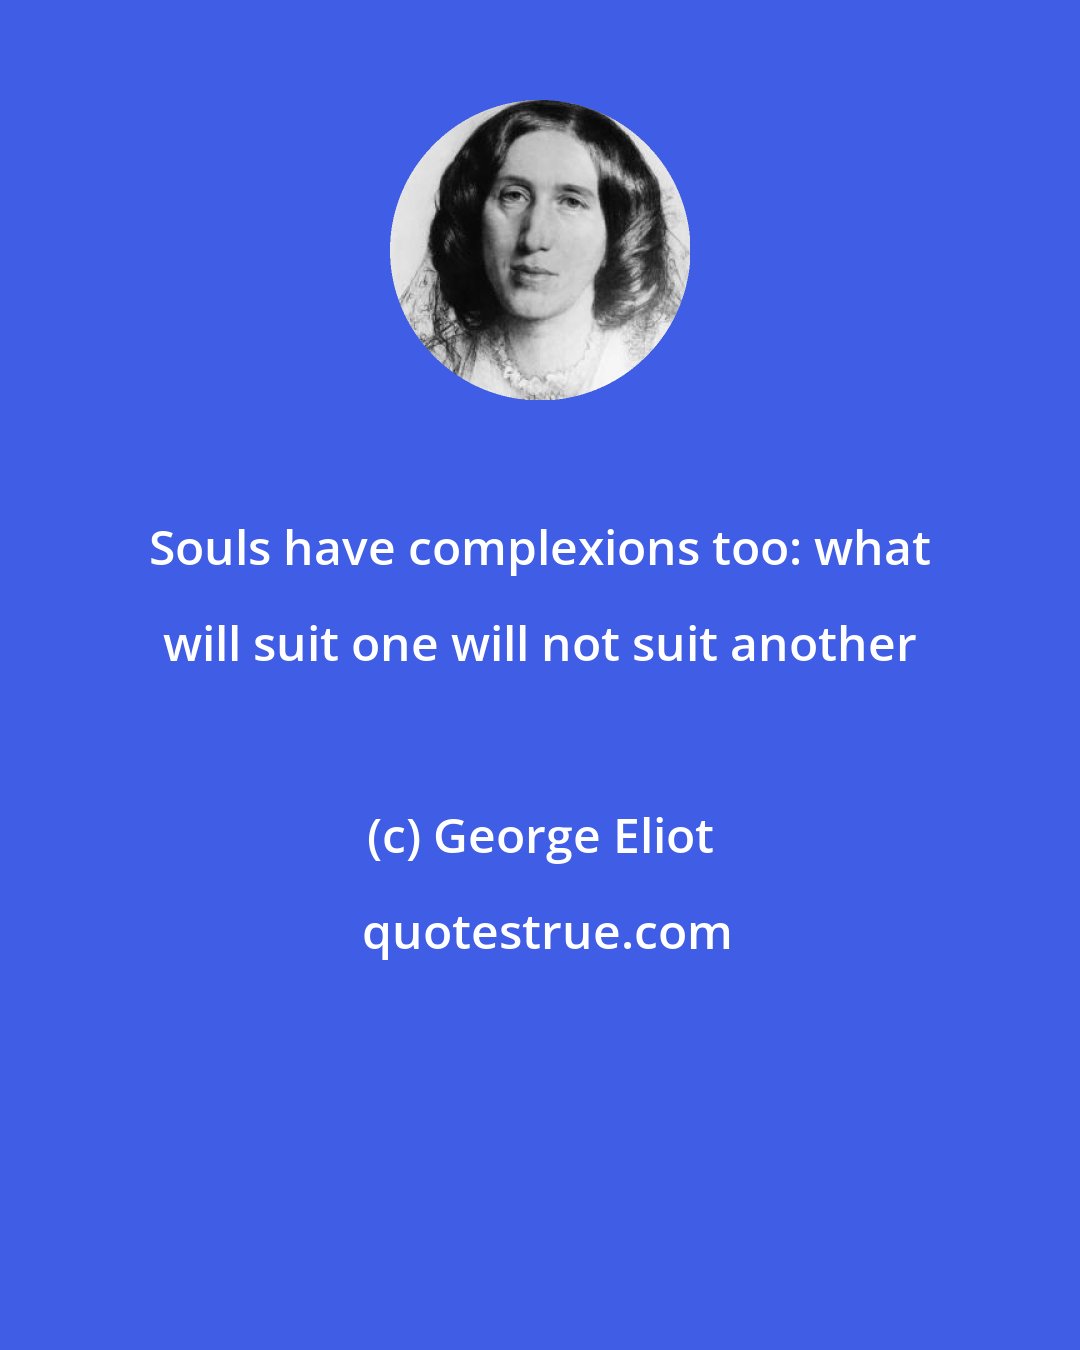 George Eliot: Souls have complexions too: what will suit one will not suit another